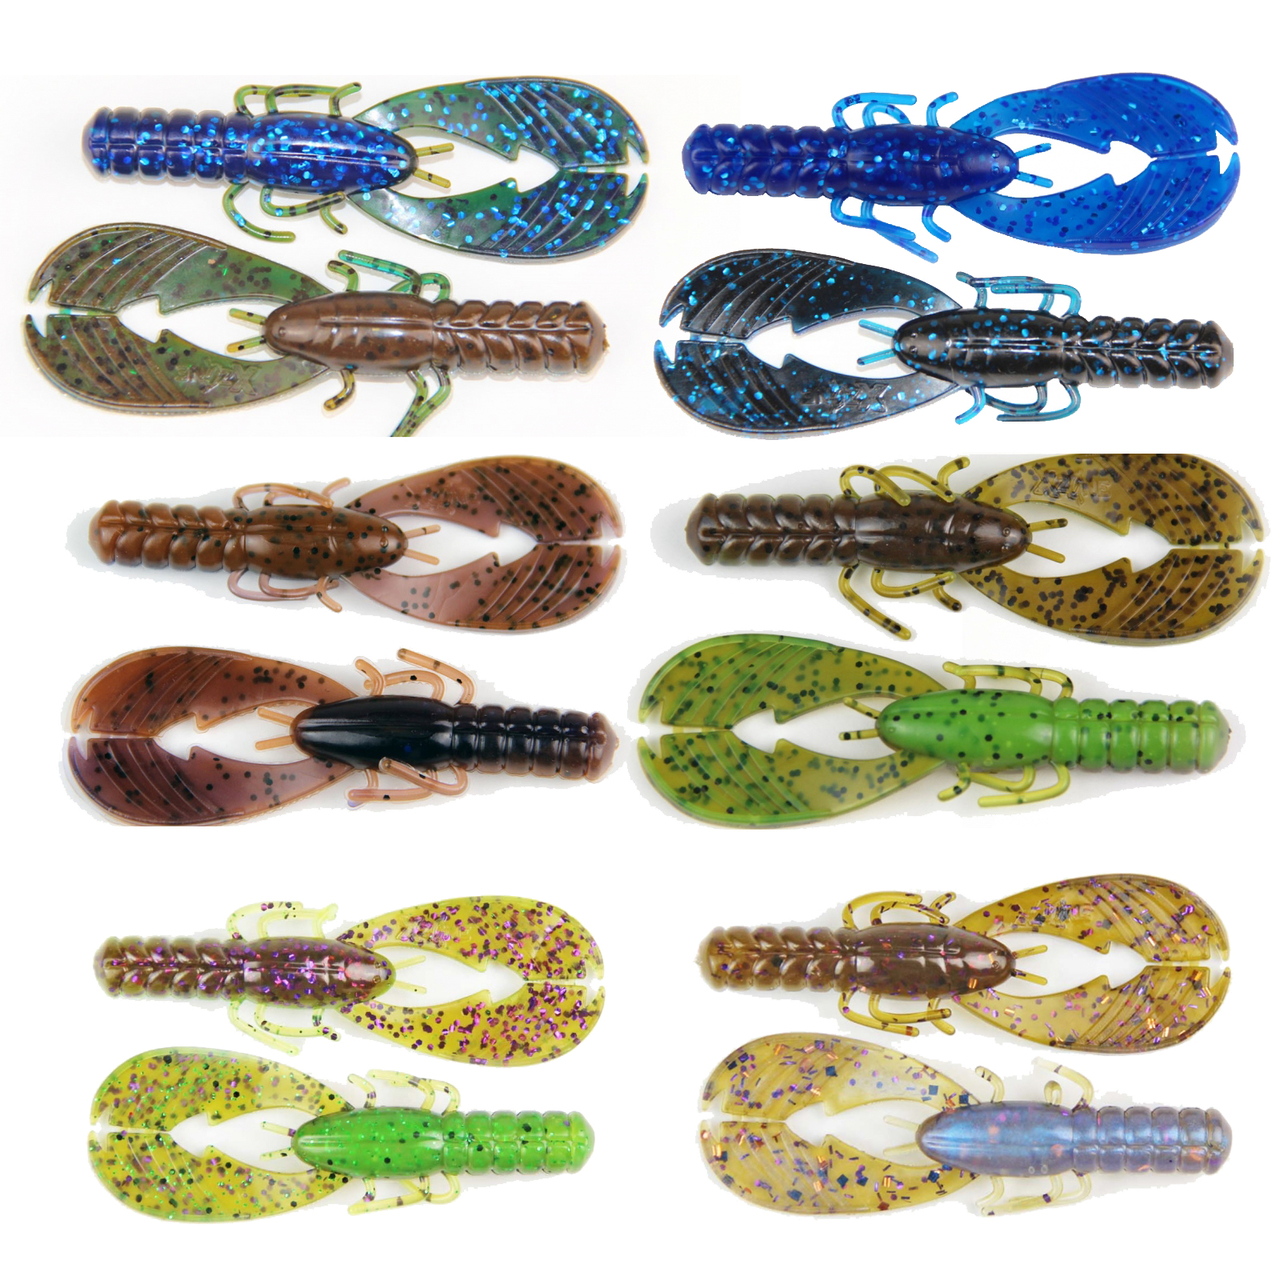 Xzone Lures 4 Muscle Back Craw - Perch / 4